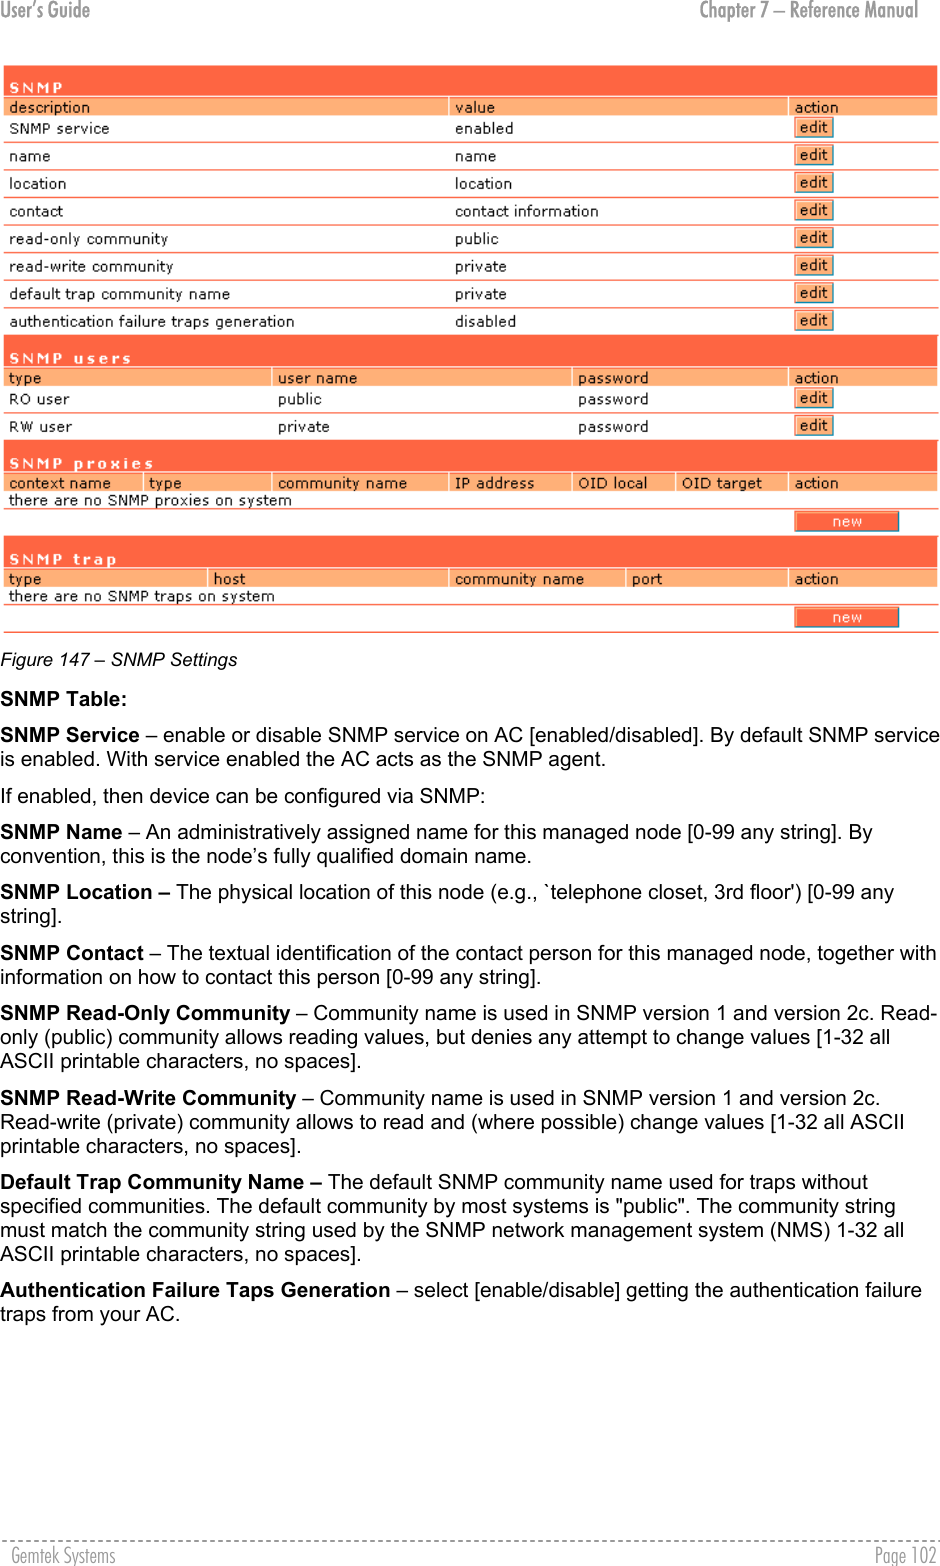 User’s Guide  Chapter 7 – Reference Manual  Figure 147 – SNMP Settings SNMP Table: SNMP Service – enable or disable SNMP service on AC [enabled/disabled]. By default SNMP service is enabled. With service enabled the AC acts as the SNMP agent. If enabled, then device can be configured via SNMP: SNMP Name – An administratively assigned name for this managed node [0-99 any string]. By convention, this is the node’s fully qualified domain name. SNMP Location – The physical location of this node (e.g., `telephone closet, 3rd floor&apos;) [0-99 any string].  SNMP Contact – The textual identification of the contact person for this managed node, together with information on how to contact this person [0-99 any string]. SNMP Read-Only Community – Community name is used in SNMP version 1 and version 2c. Read-only (public) community allows reading values, but denies any attempt to change values [1-32 all ASCII printable characters, no spaces]. SNMP Read-Write Community – Community name is used in SNMP version 1 and version 2c. Read-write (private) community allows to read and (where possible) change values [1-32 all ASCII printable characters, no spaces]. Default Trap Community Name – The default SNMP community name used for traps without specified communities. The default community by most systems is &quot;public&quot;. The community string must match the community string used by the SNMP network management system (NMS) 1-32 all ASCII printable characters, no spaces]. Authentication Failure Taps Generation – select [enable/disable] getting the authentication failure traps from your AC.      Gemtek Systems    Page 102  